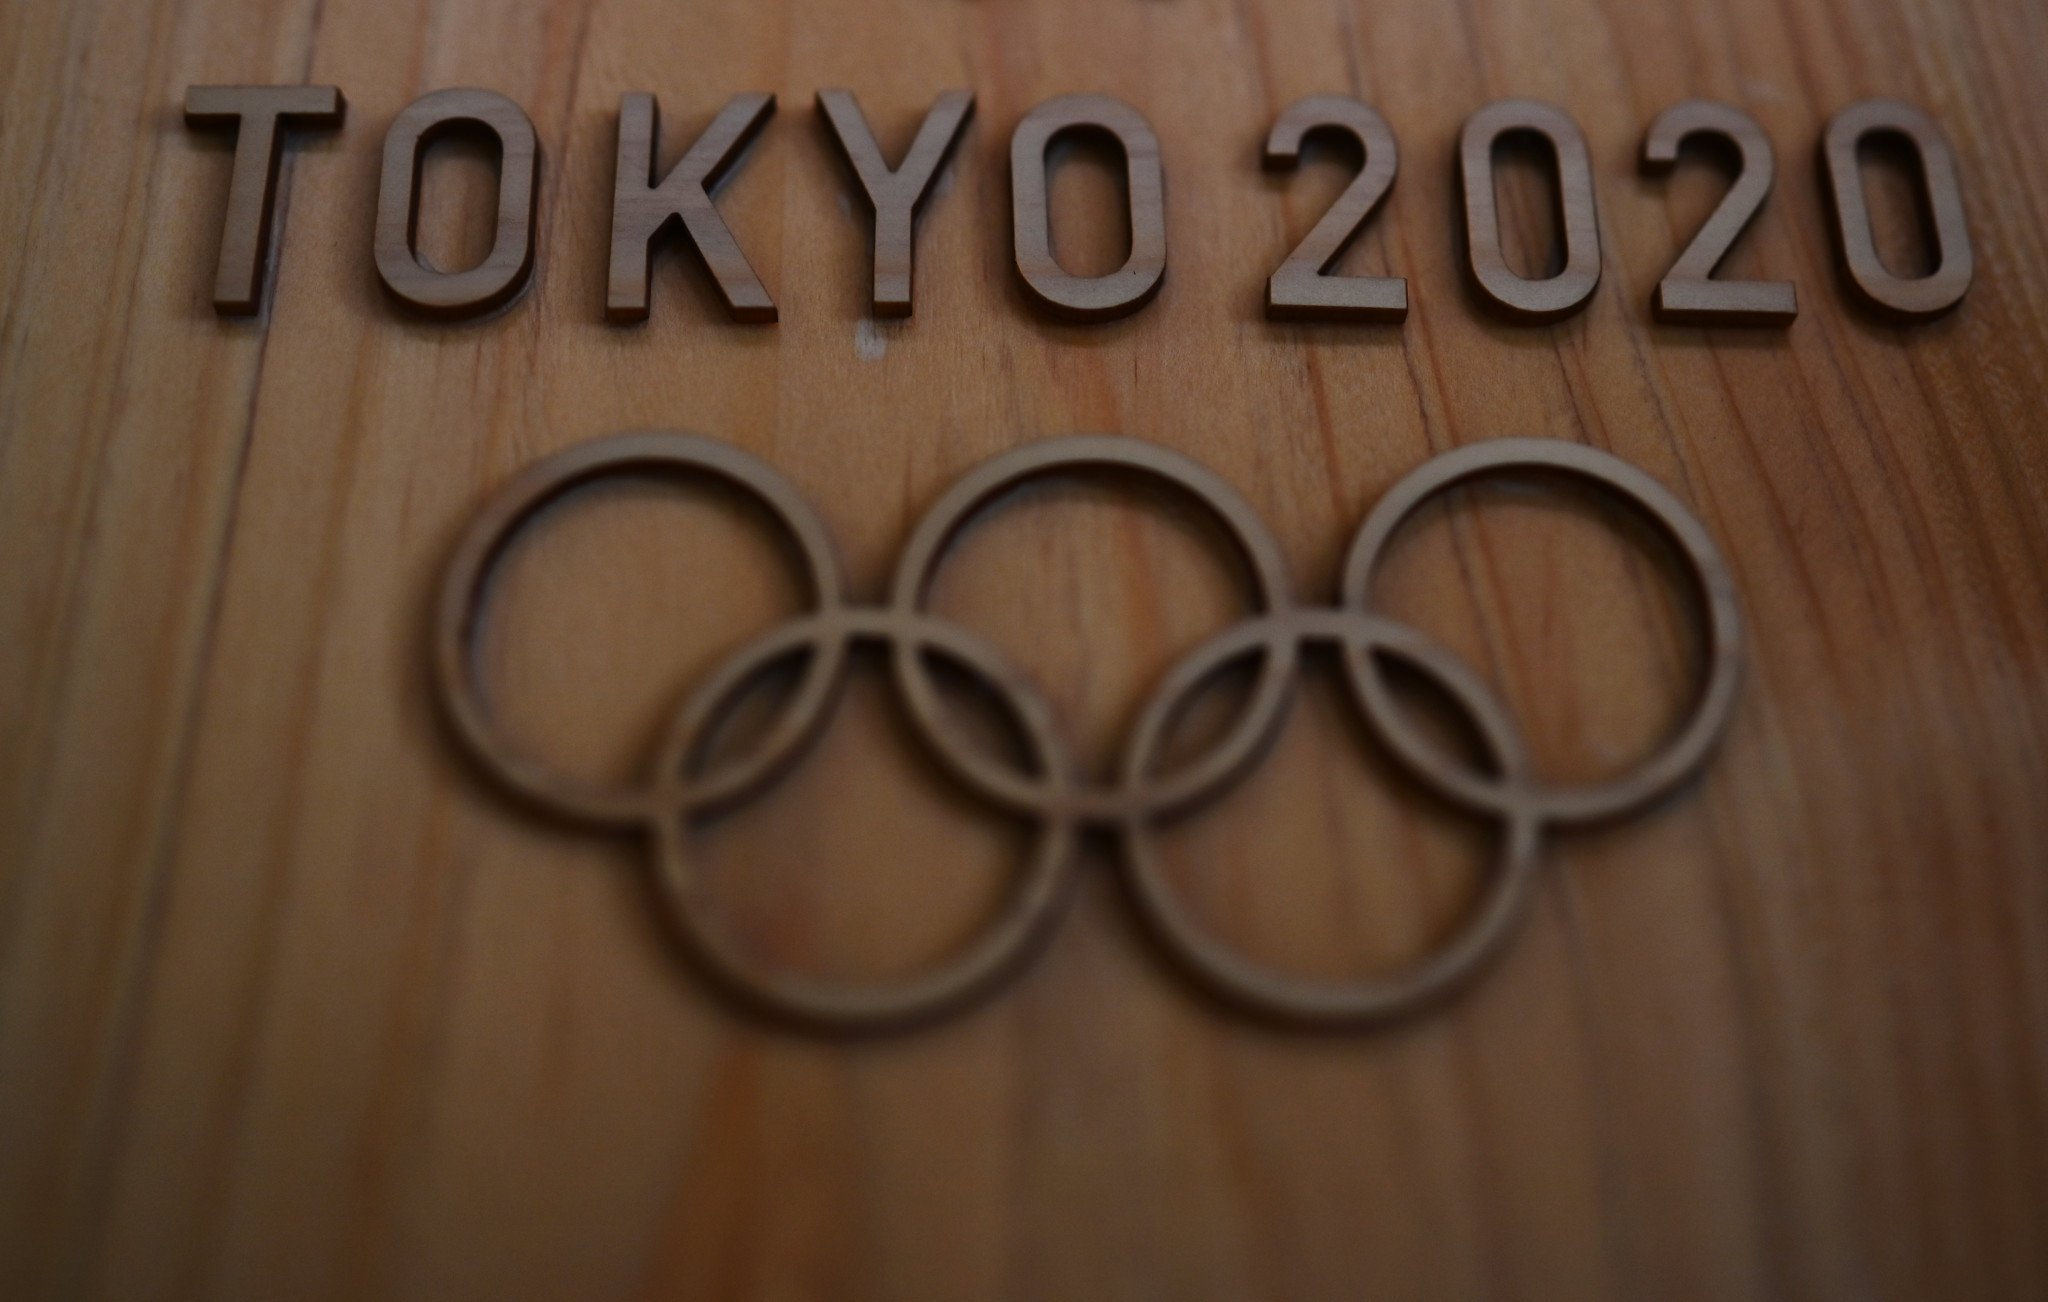 Former chairman of Aoki Holdings Hironori Aoki is among three people to have been charged with bribing a former Tokyo 2020 chief executive ©Getty Images